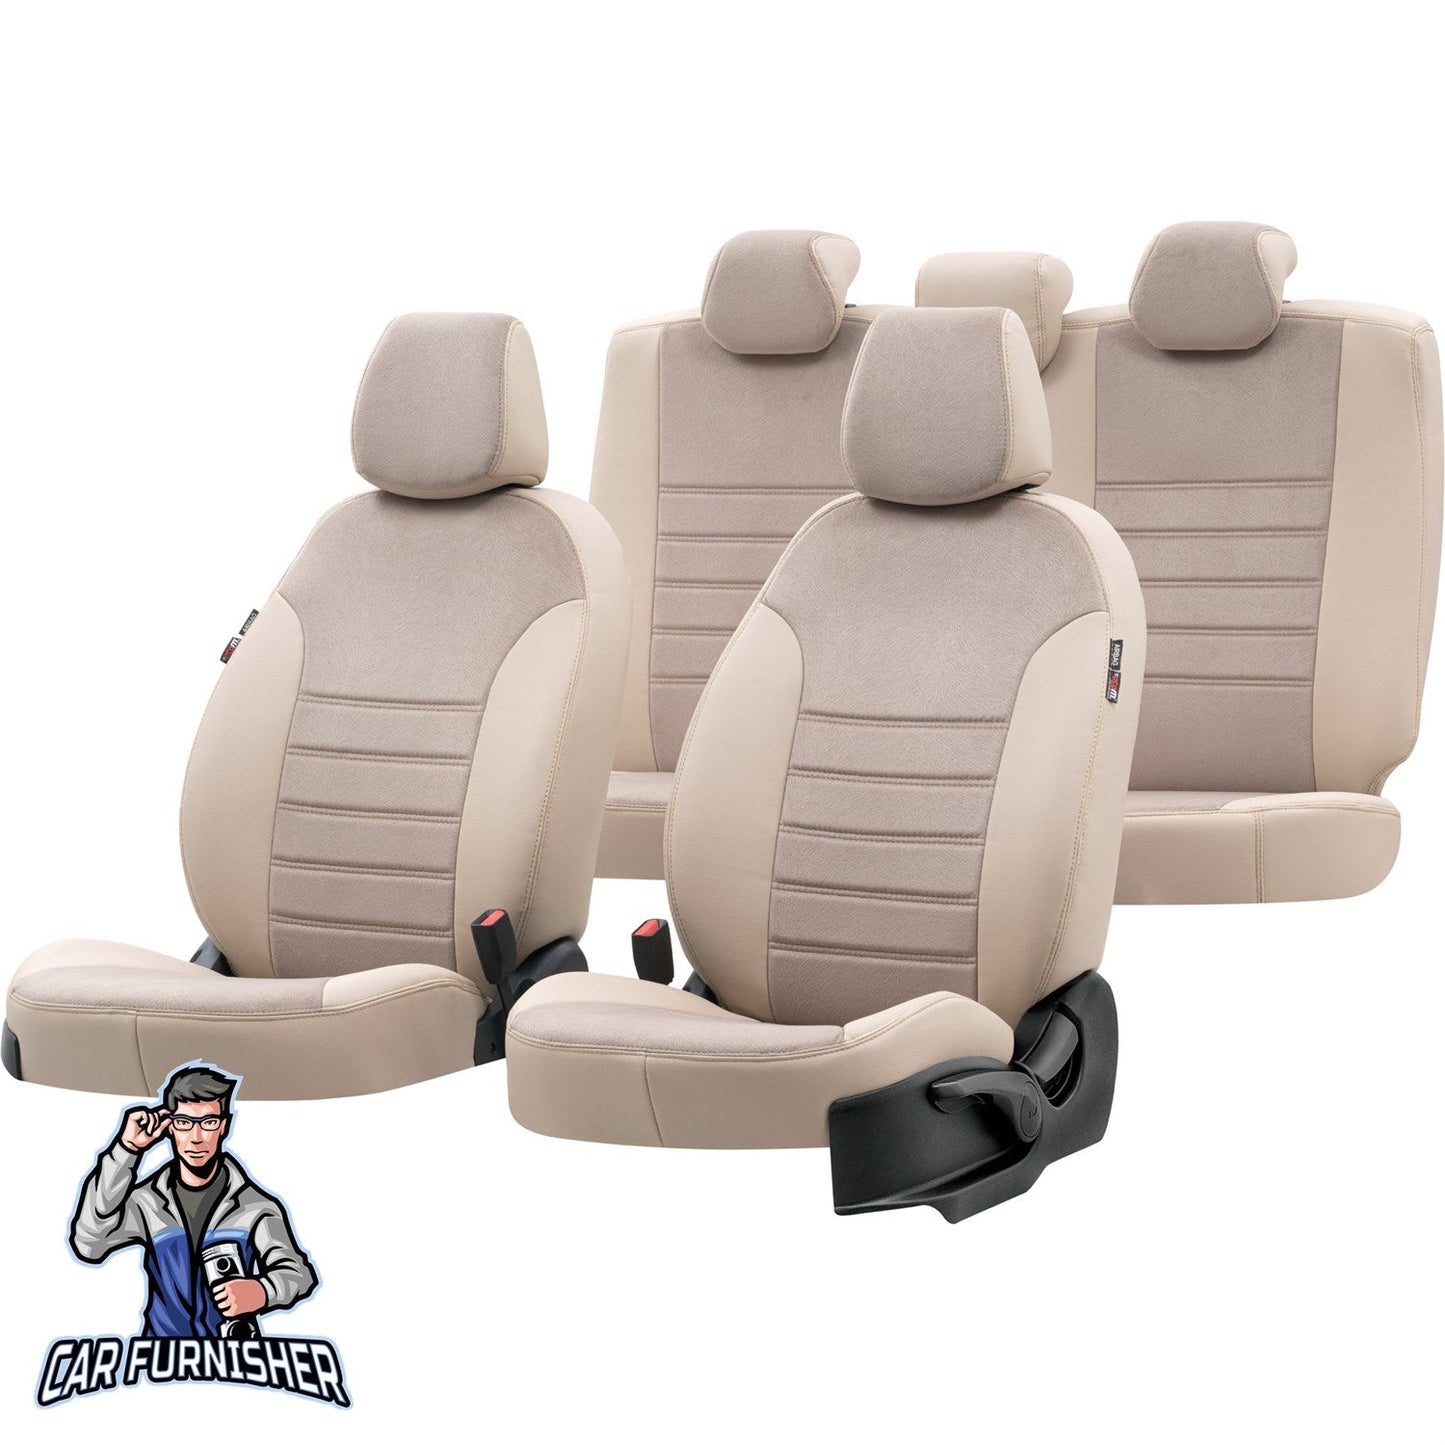 Volkswagen Amarok Seat Cover London Foal Feather Design Beige Leather & Foal Feather